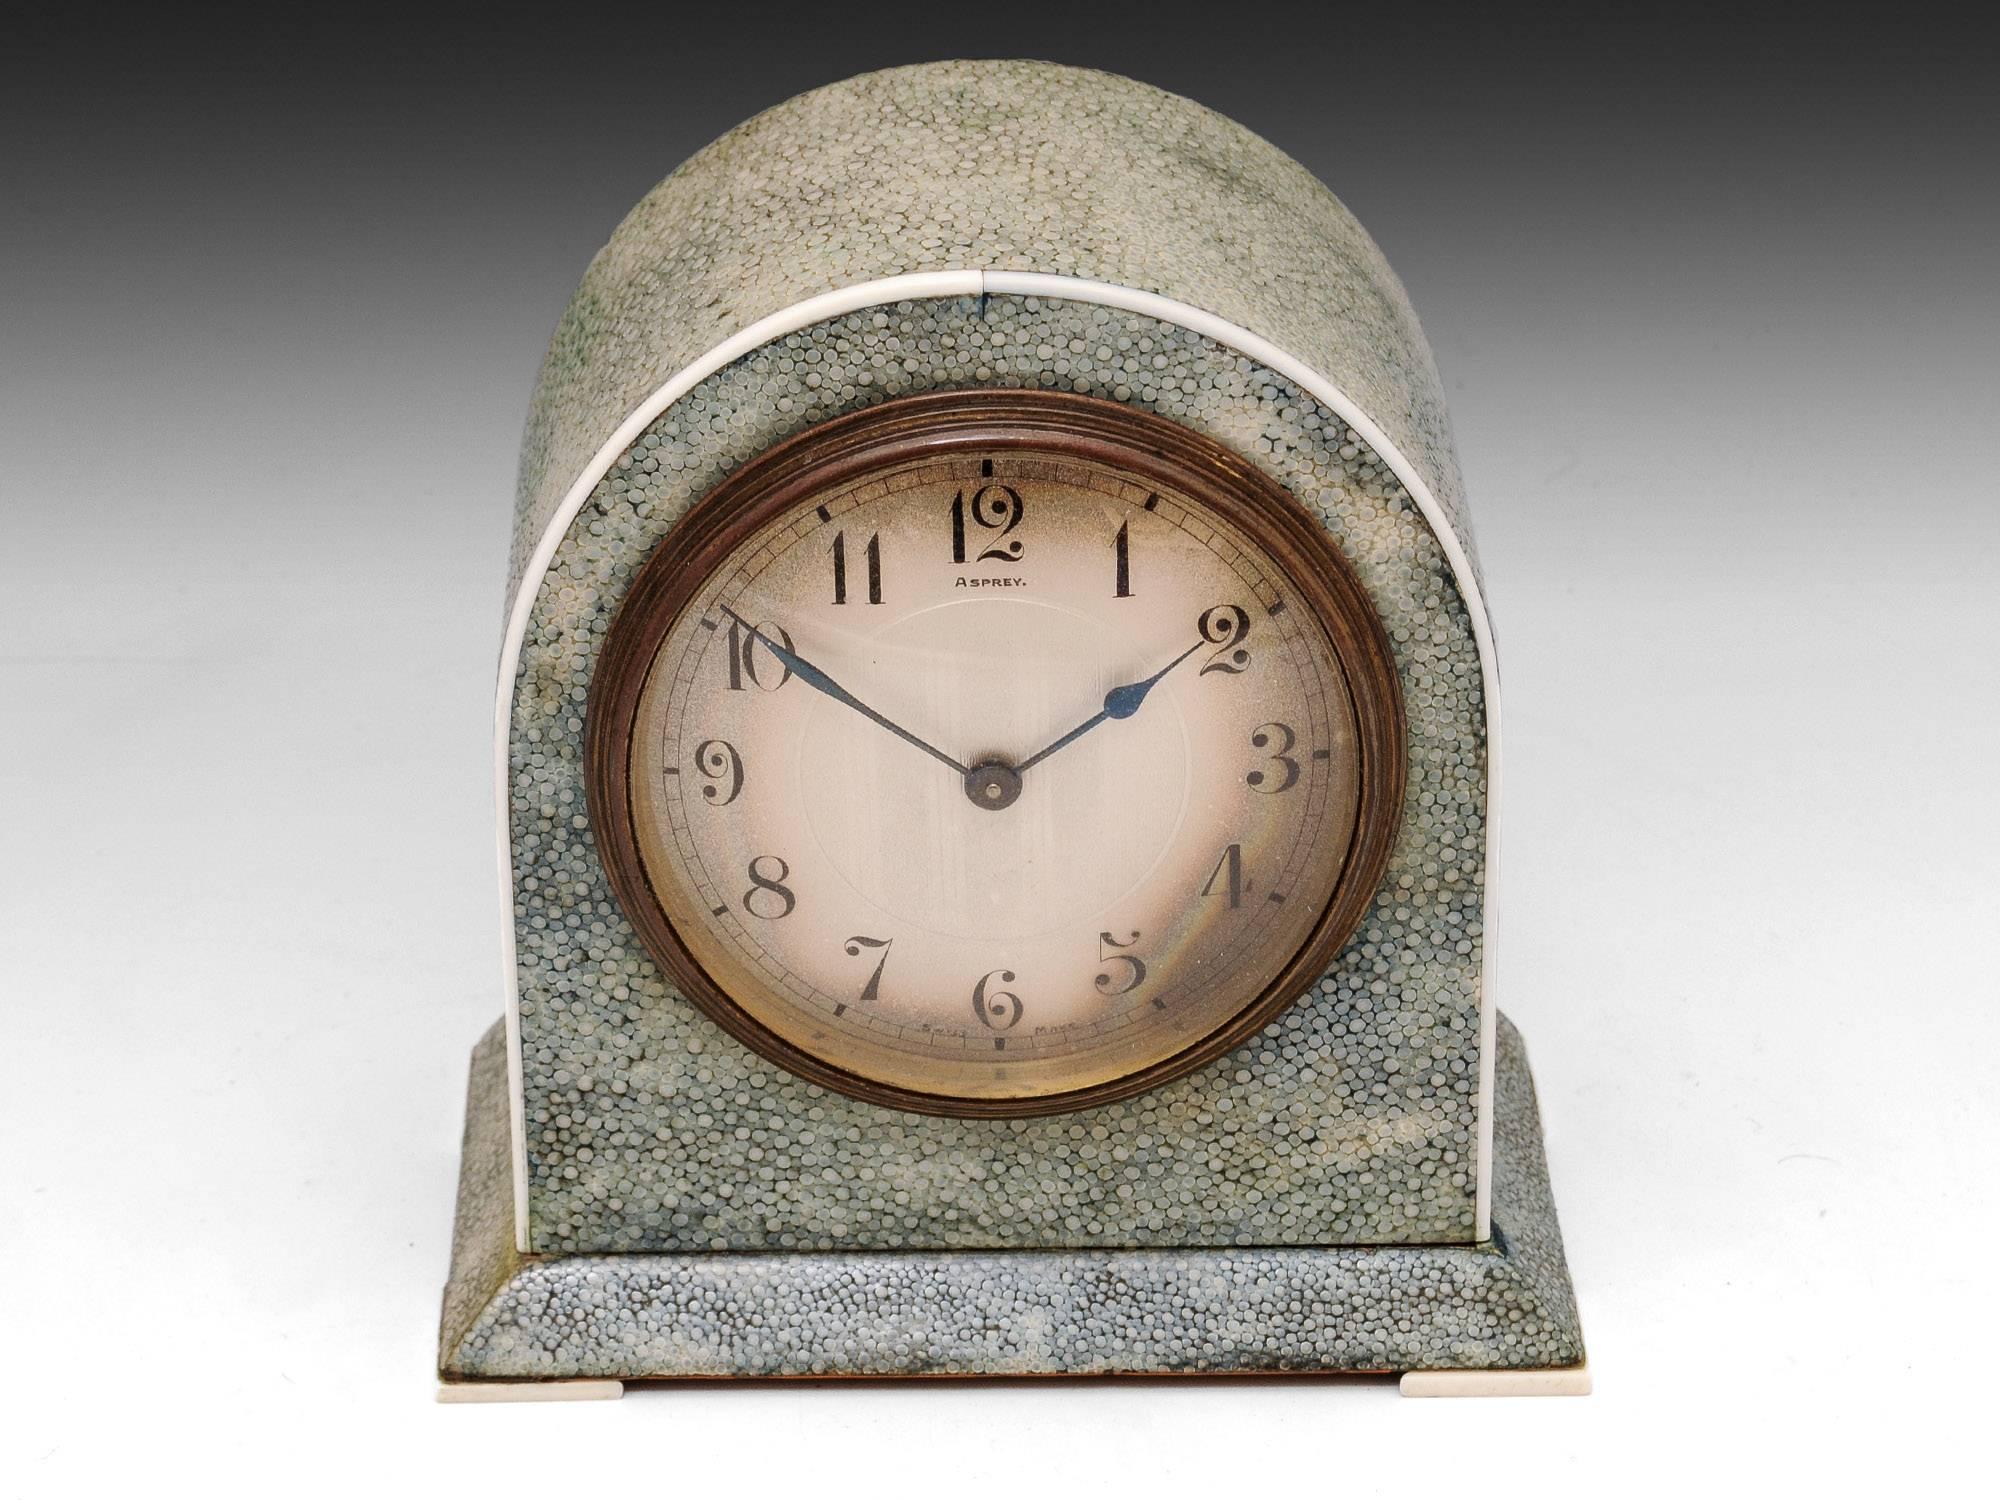 Art Deco shagreen mantel Clock by Asprey with French eight day movement. 

Featuring ivory edging and feet and a brass framed clock face. 

Shagreen is a leather made from sharkskin or the skin of a Stingray. This type of Shagreen was first made